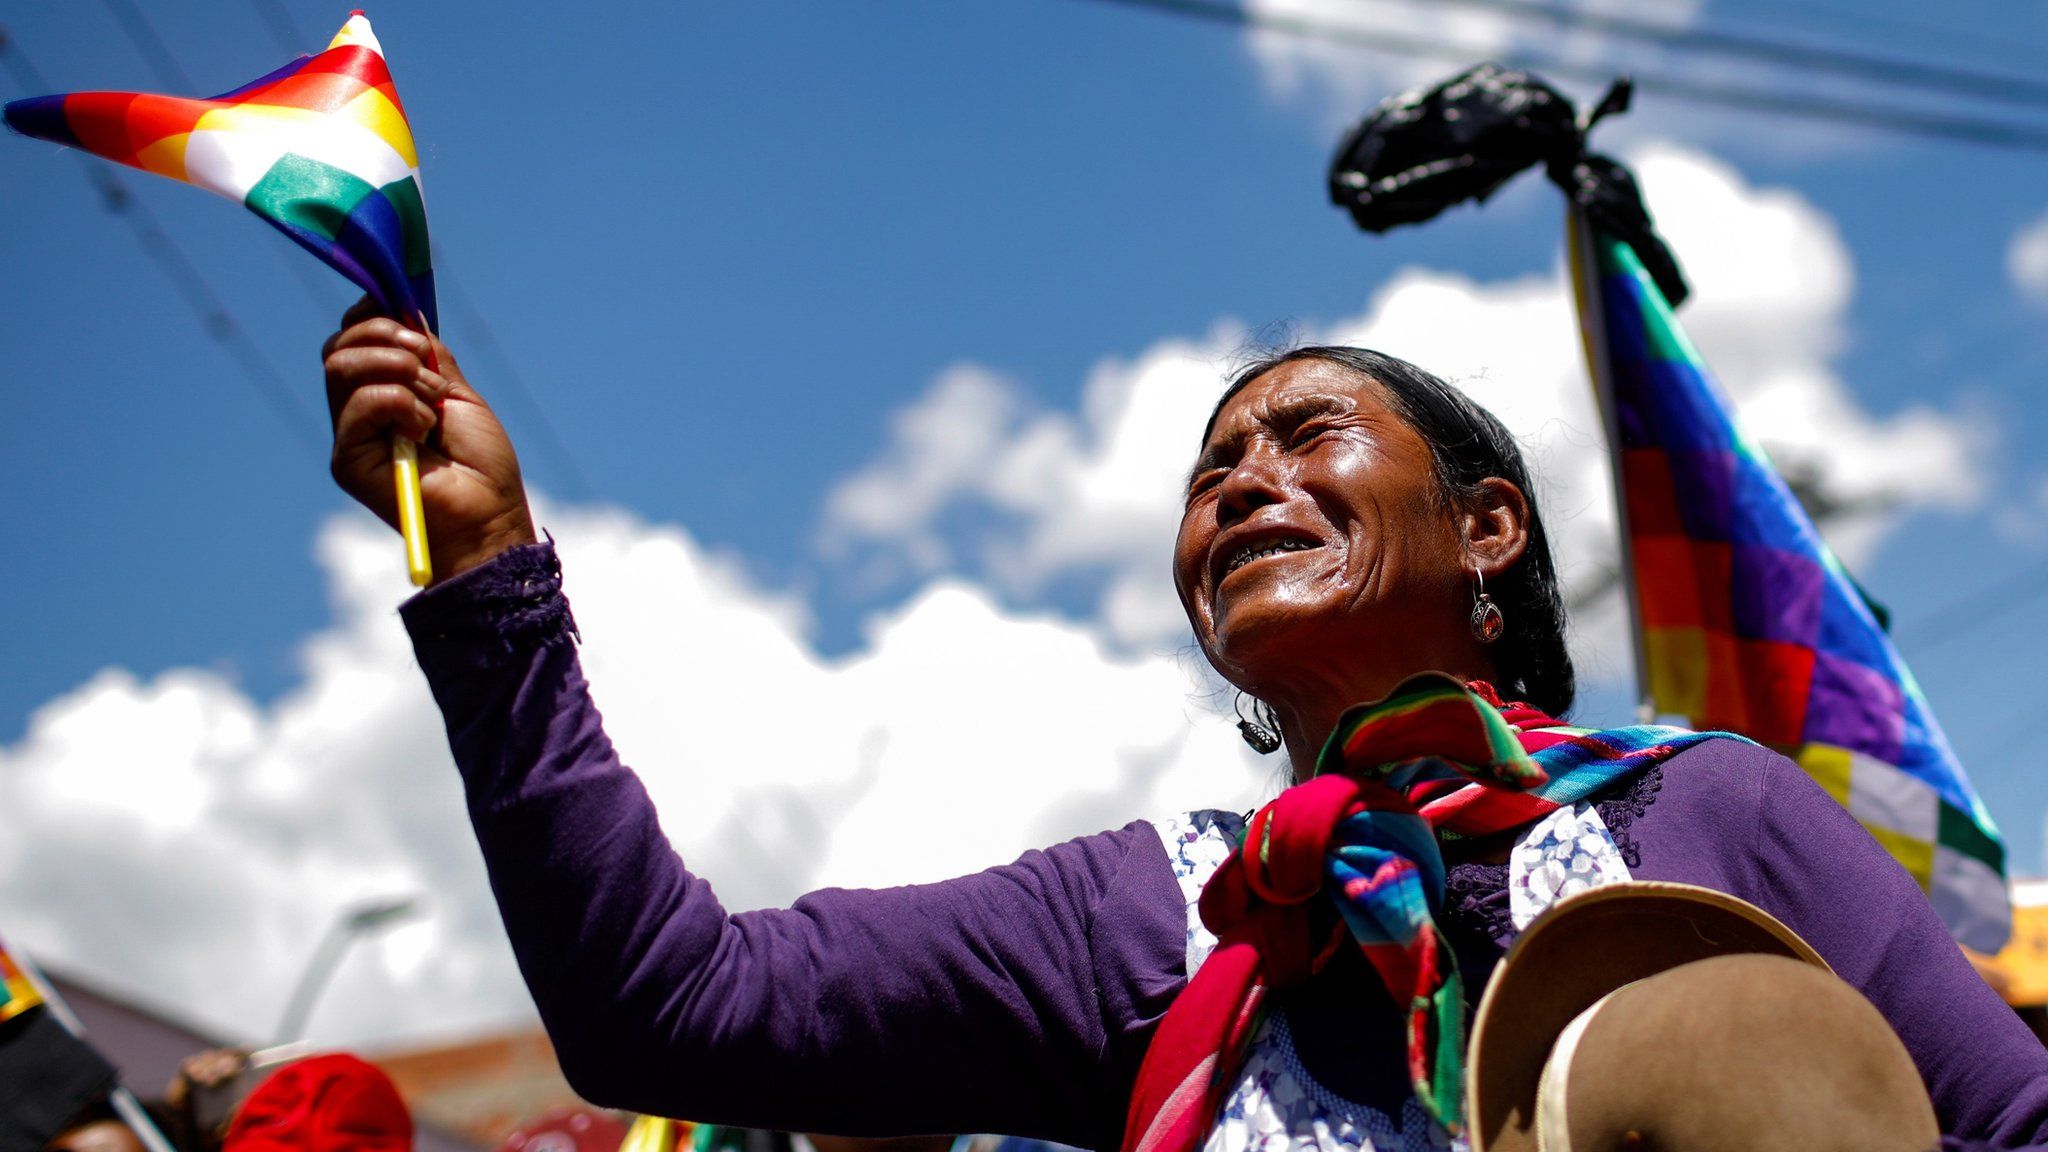 A supporter of Evo Morales at a protest in La Paz on 21 November